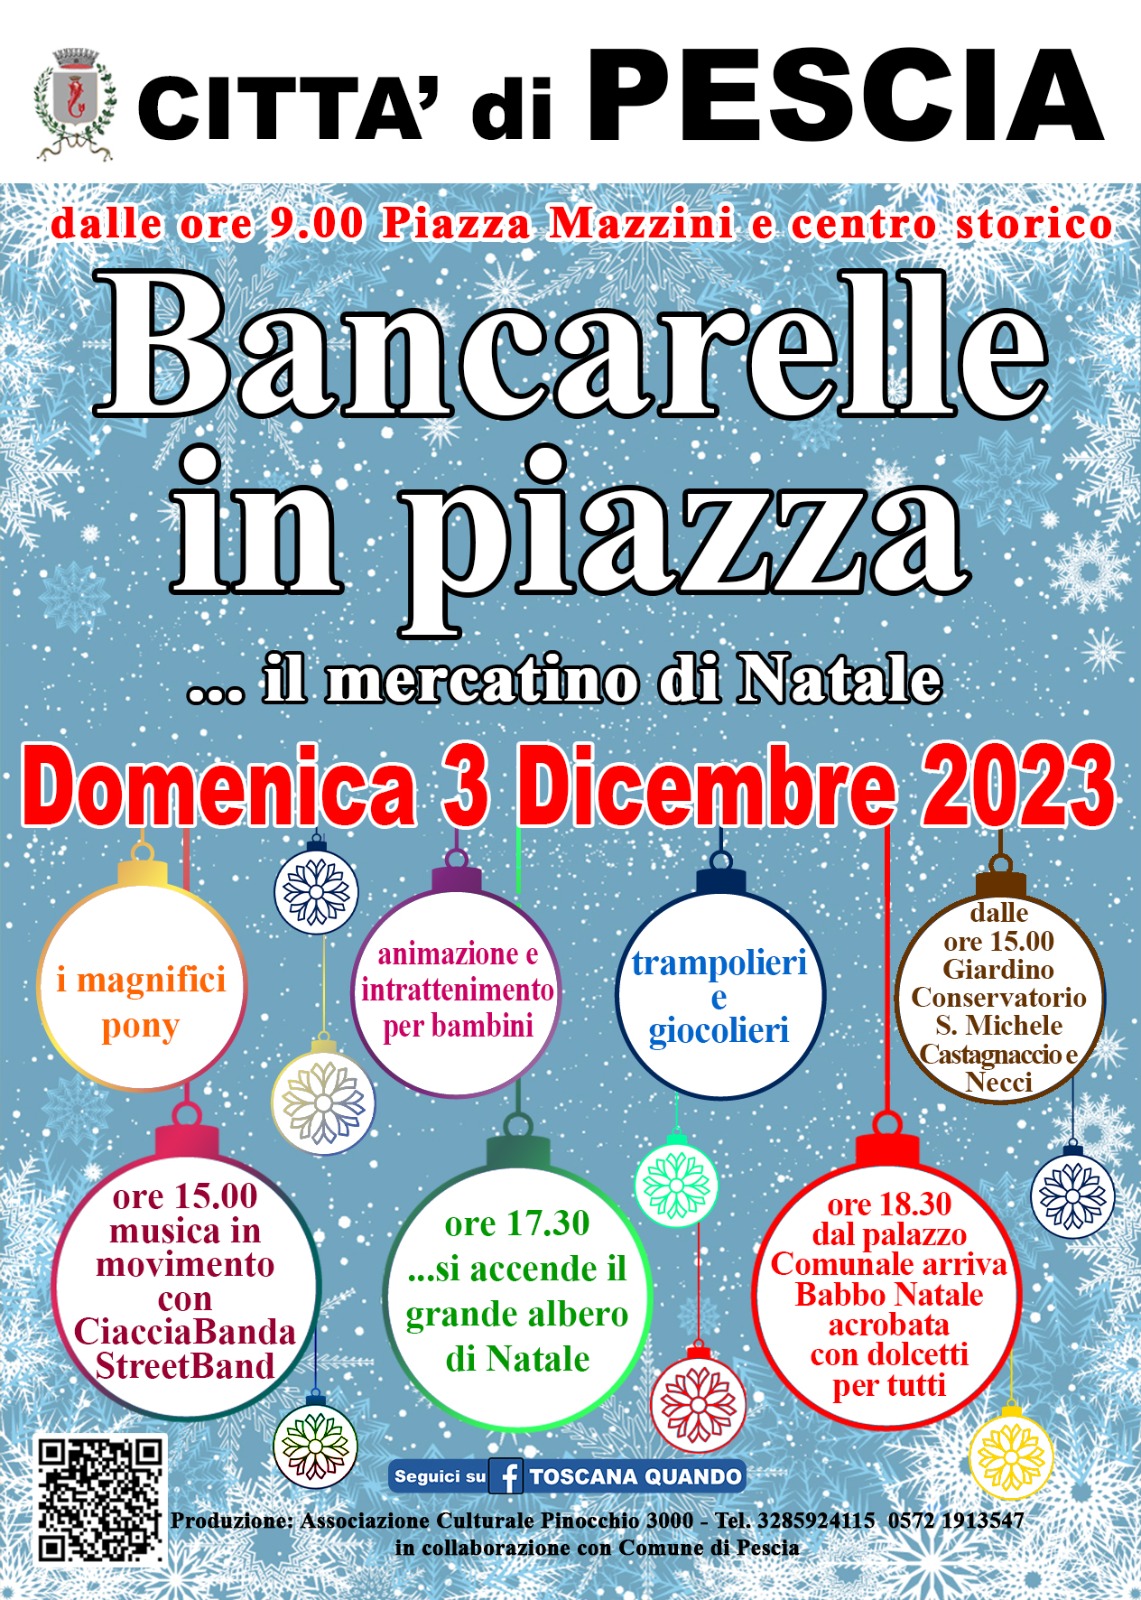 Bancarelle in Piazza